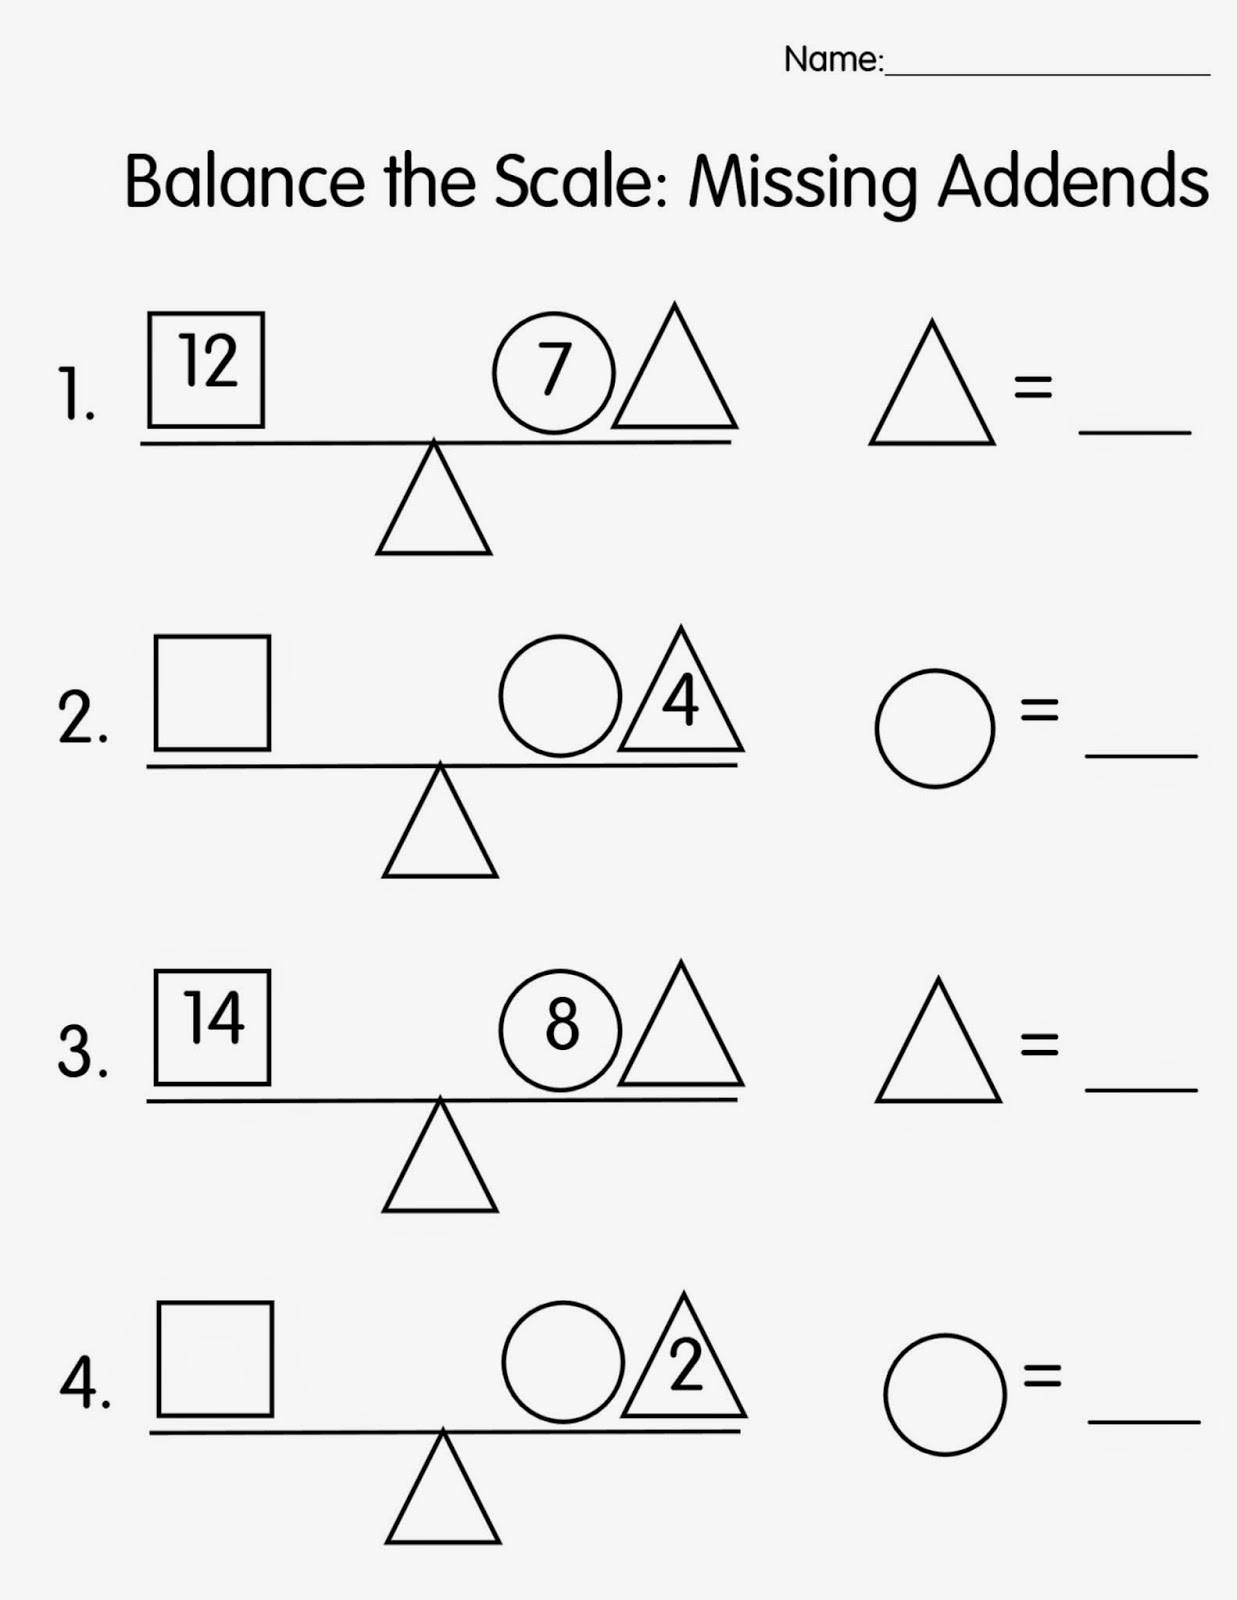 13-best-images-of-missing-addends-word-problems-worksheets-first